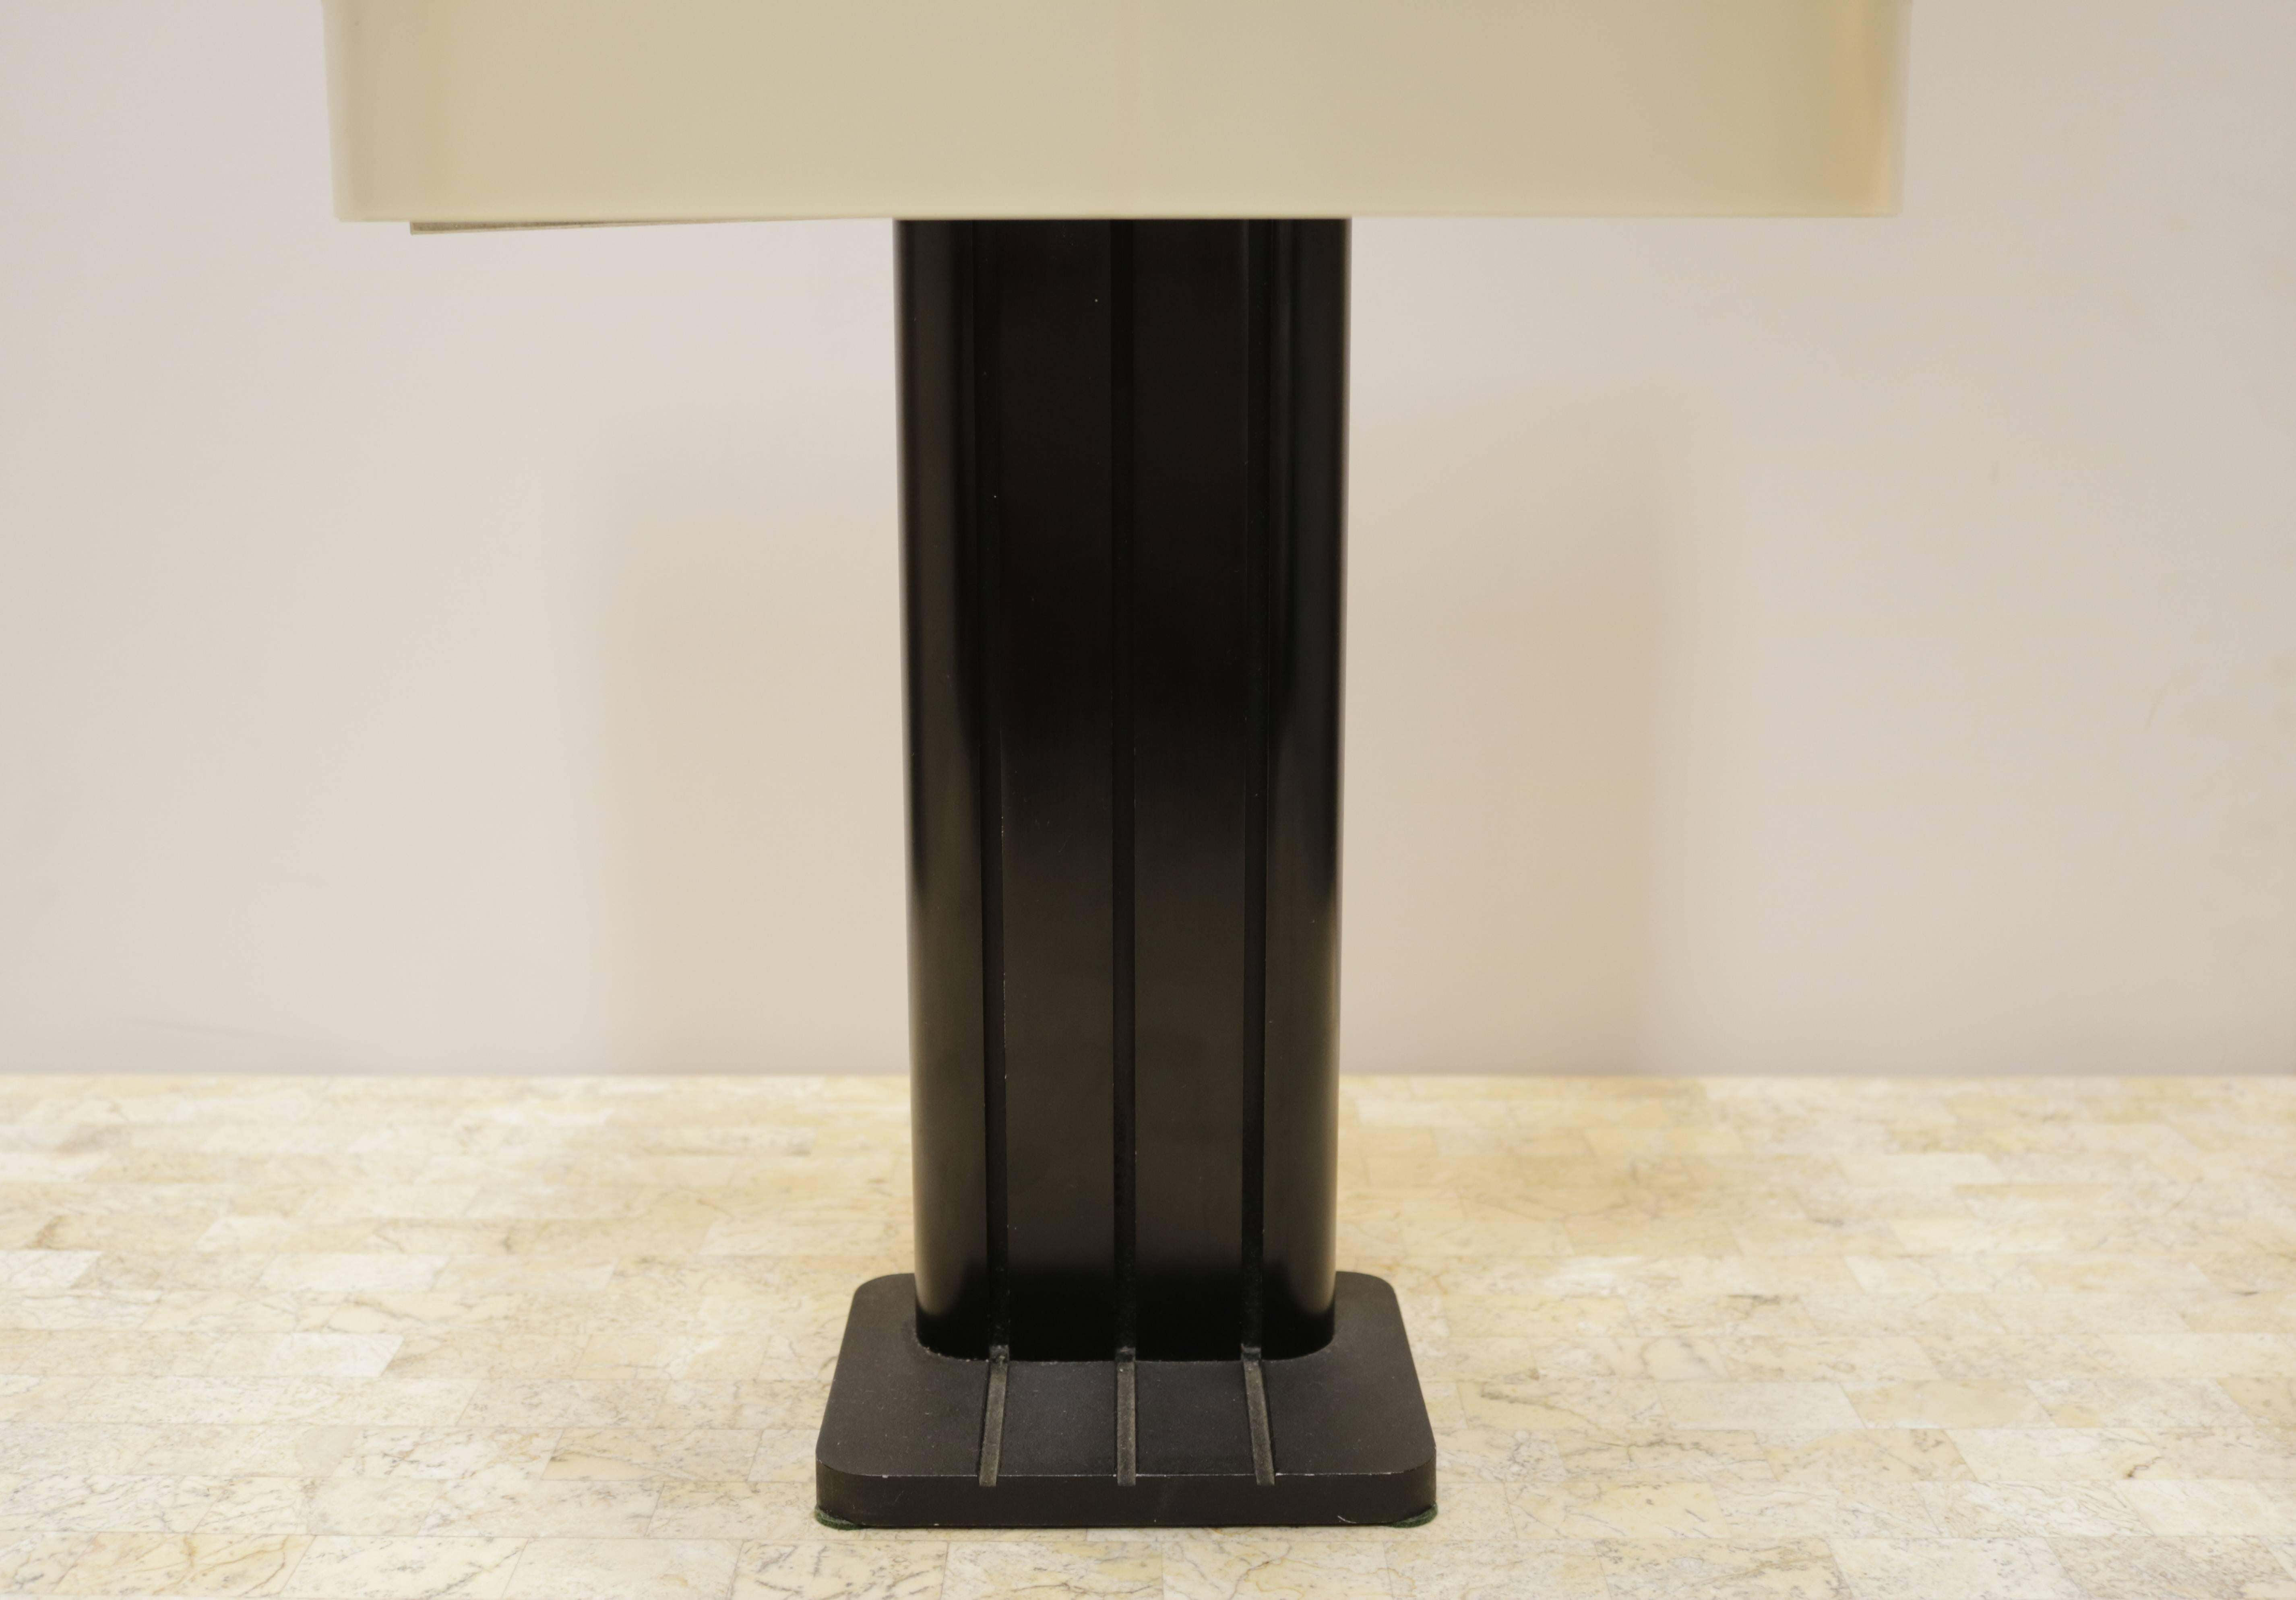 Cream and black, 1970s table lamp has a metal body and plastic shade. The interior of the shade is bisected into two sections with one socket on each side - lamp takes two bulbs.
The half circle shade allows you to place it against the wall on a